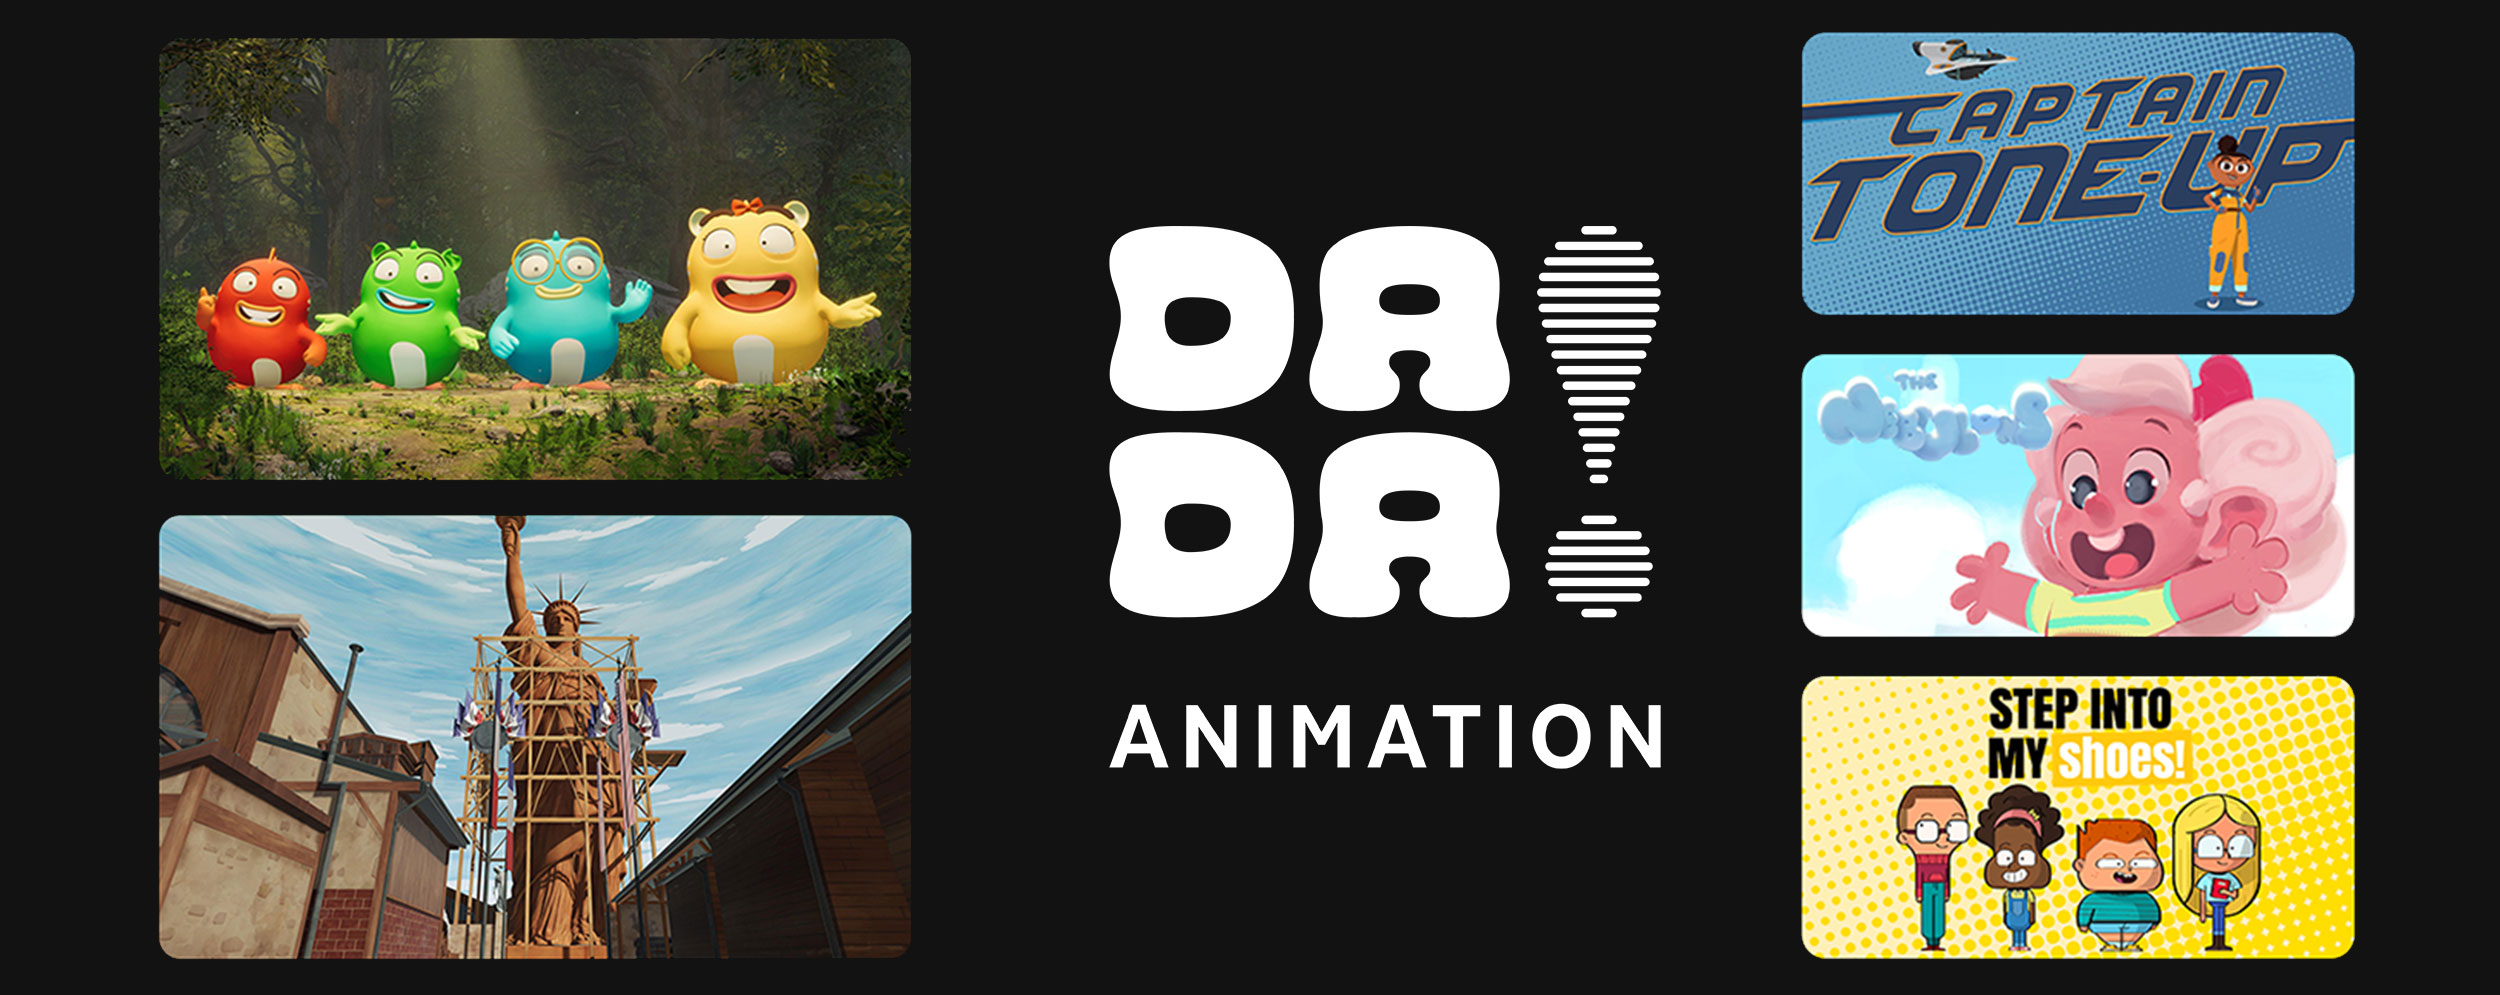 Hue Dada! Productions, now Dada! Animation set to serve audacity, innovation, and creativity to all